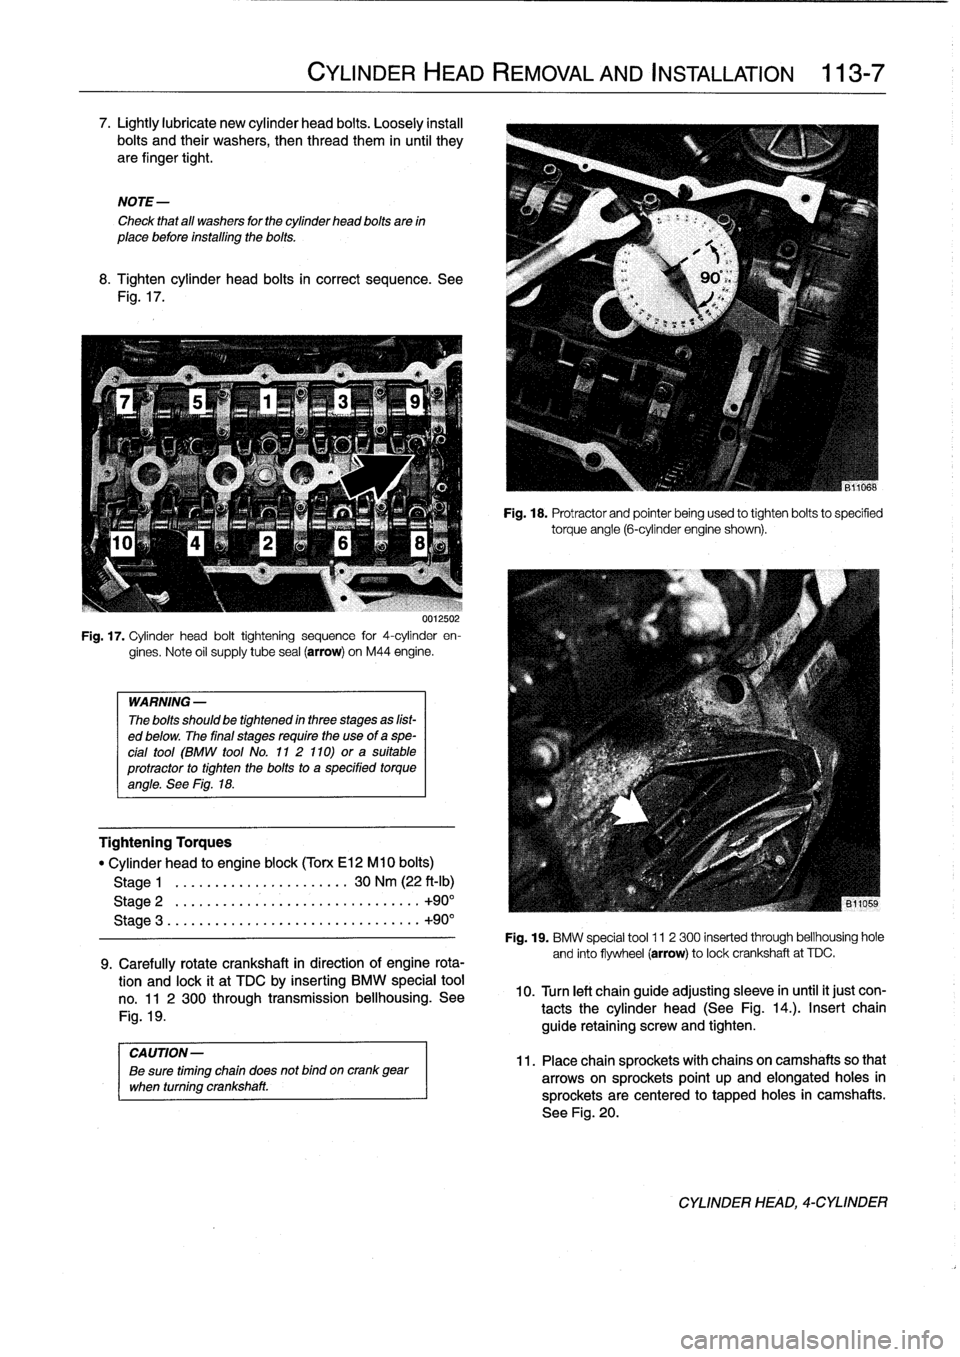 BMW 323i 1998 E36 Workshop Manual 
7
.
Lightly
lubricate
new
cylinder
head
bolts
.
Loosely
instan
bolts
and
their
washers,
then
thread
them
in
until
they
are
finger
tight
.

NOTE-

Check
that
all
washers
for
the
cylinder
head
bolts
ar